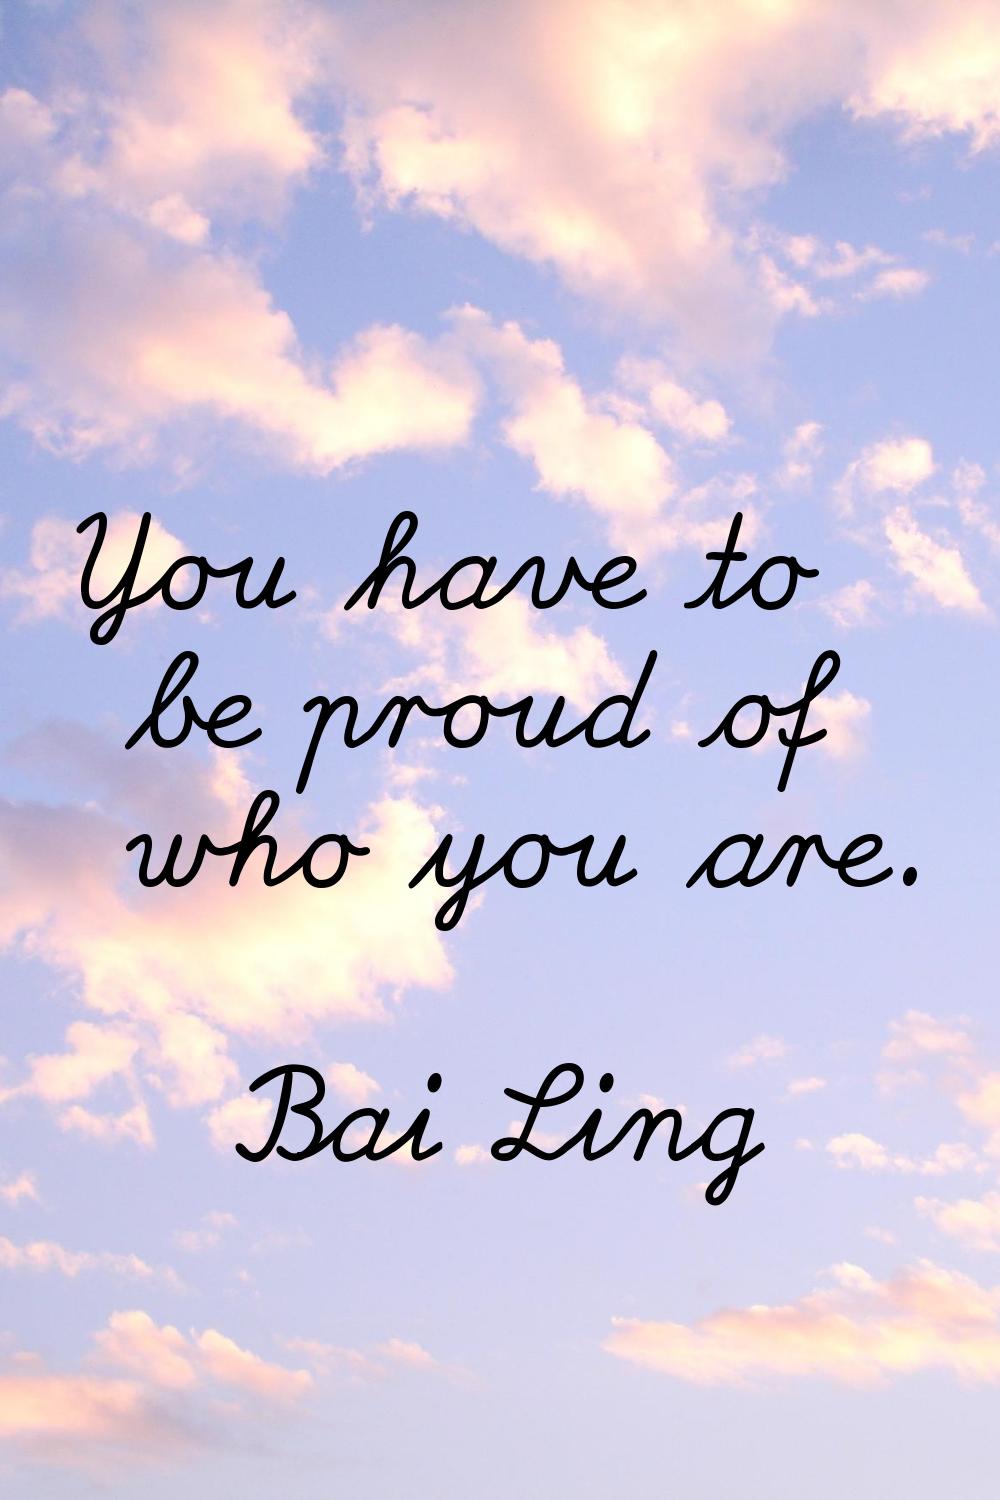 You have to be proud of who you are.